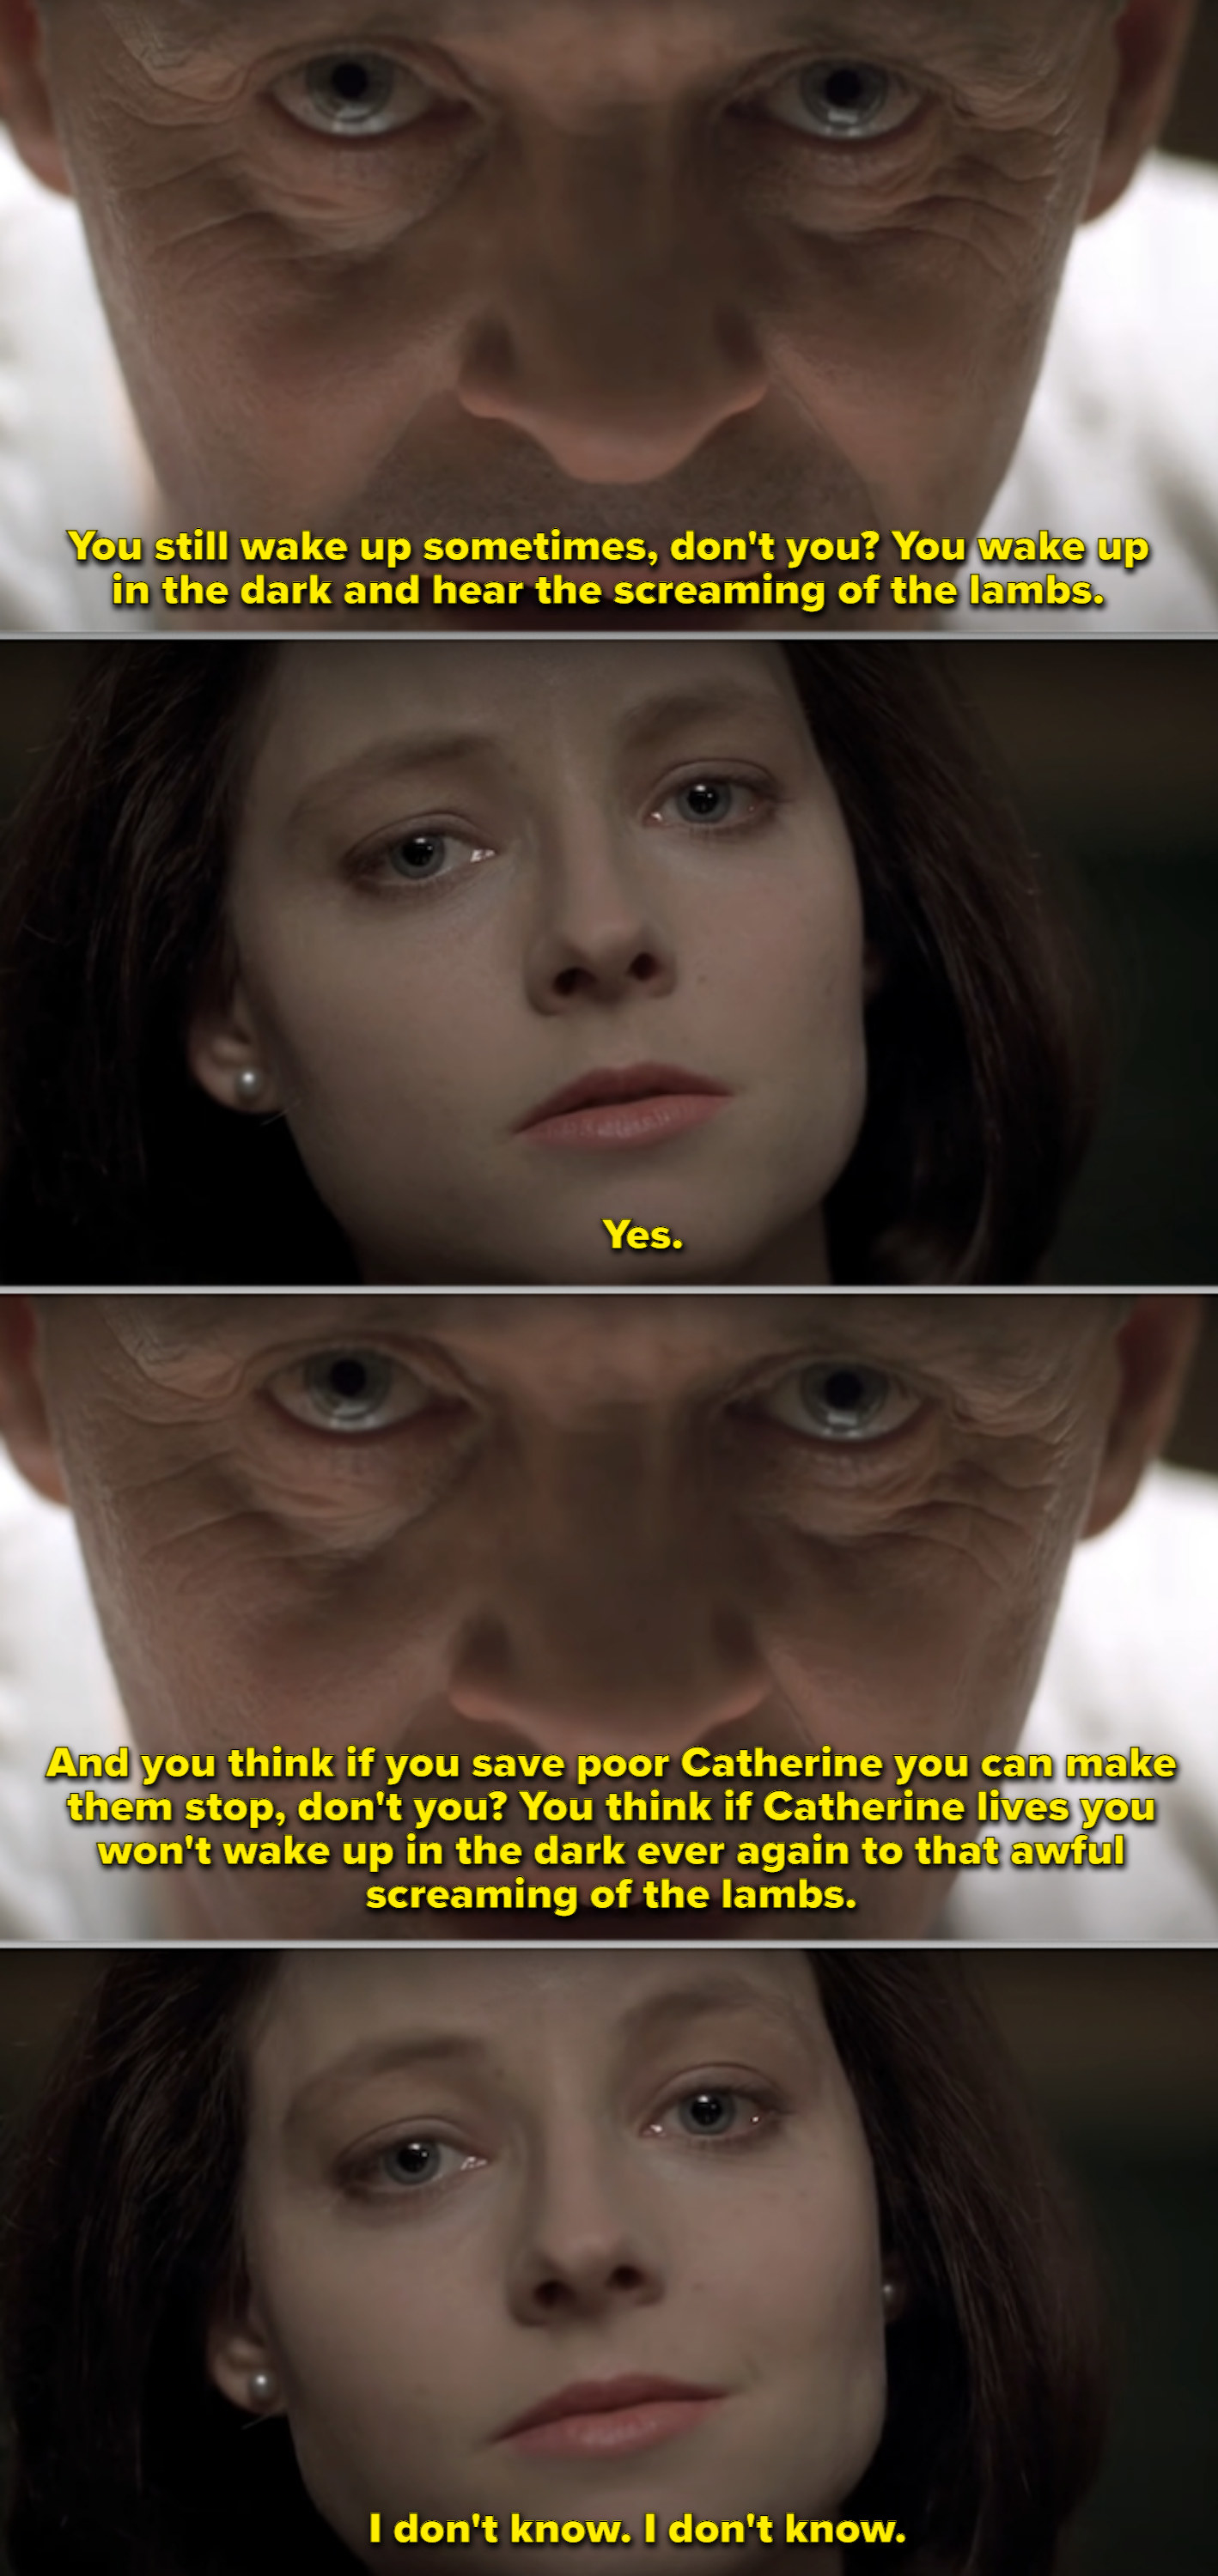 Clarice talking to Dr. Lecter in his cell in the movie